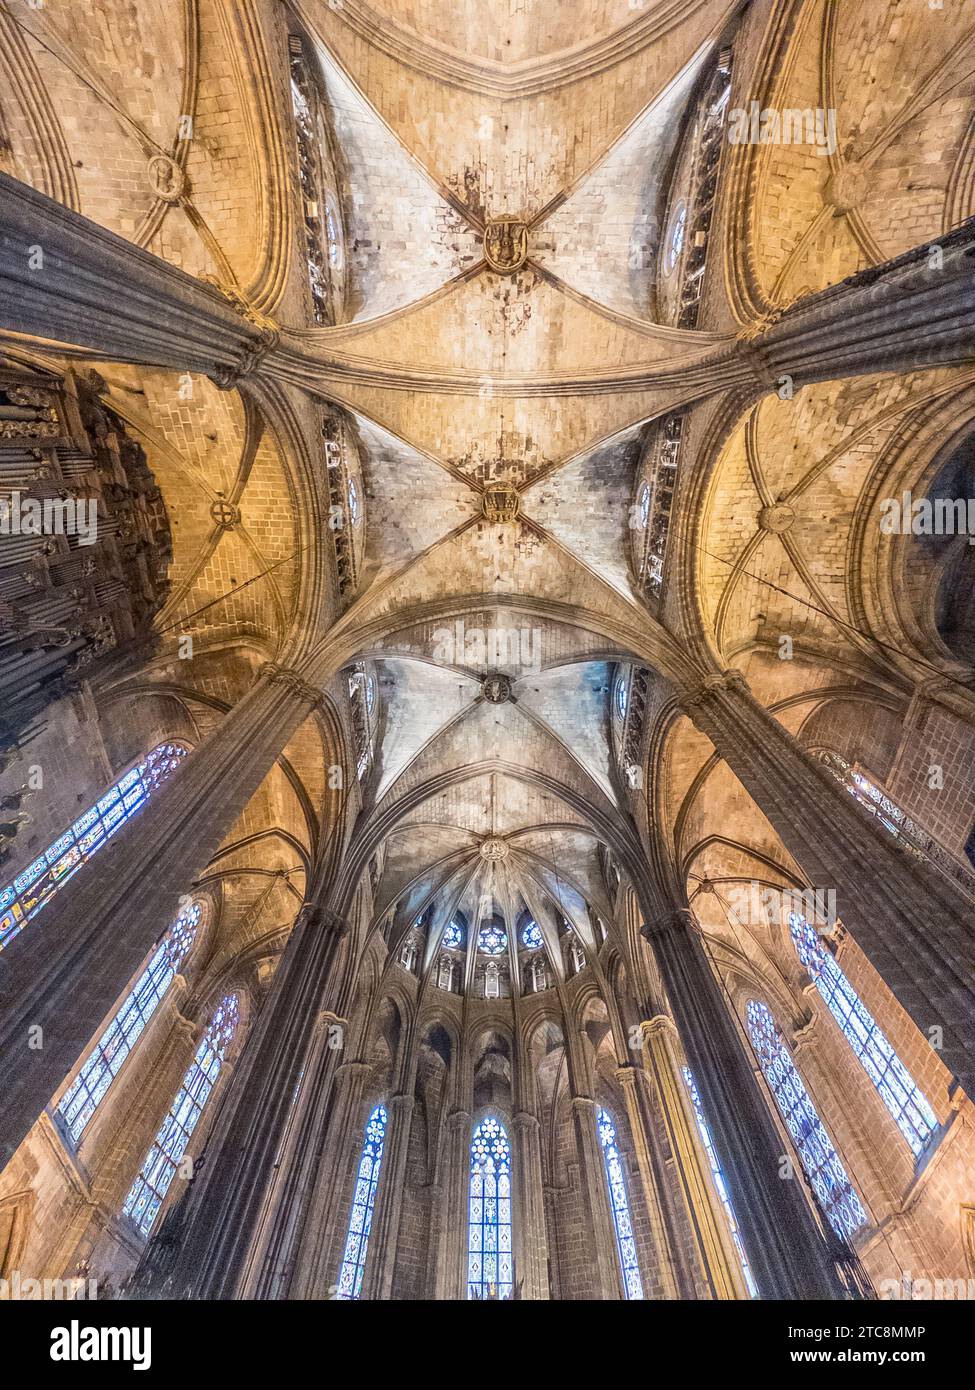 Interior ceiling of the historic Barcelona Cathedral in Spain Stock Photo